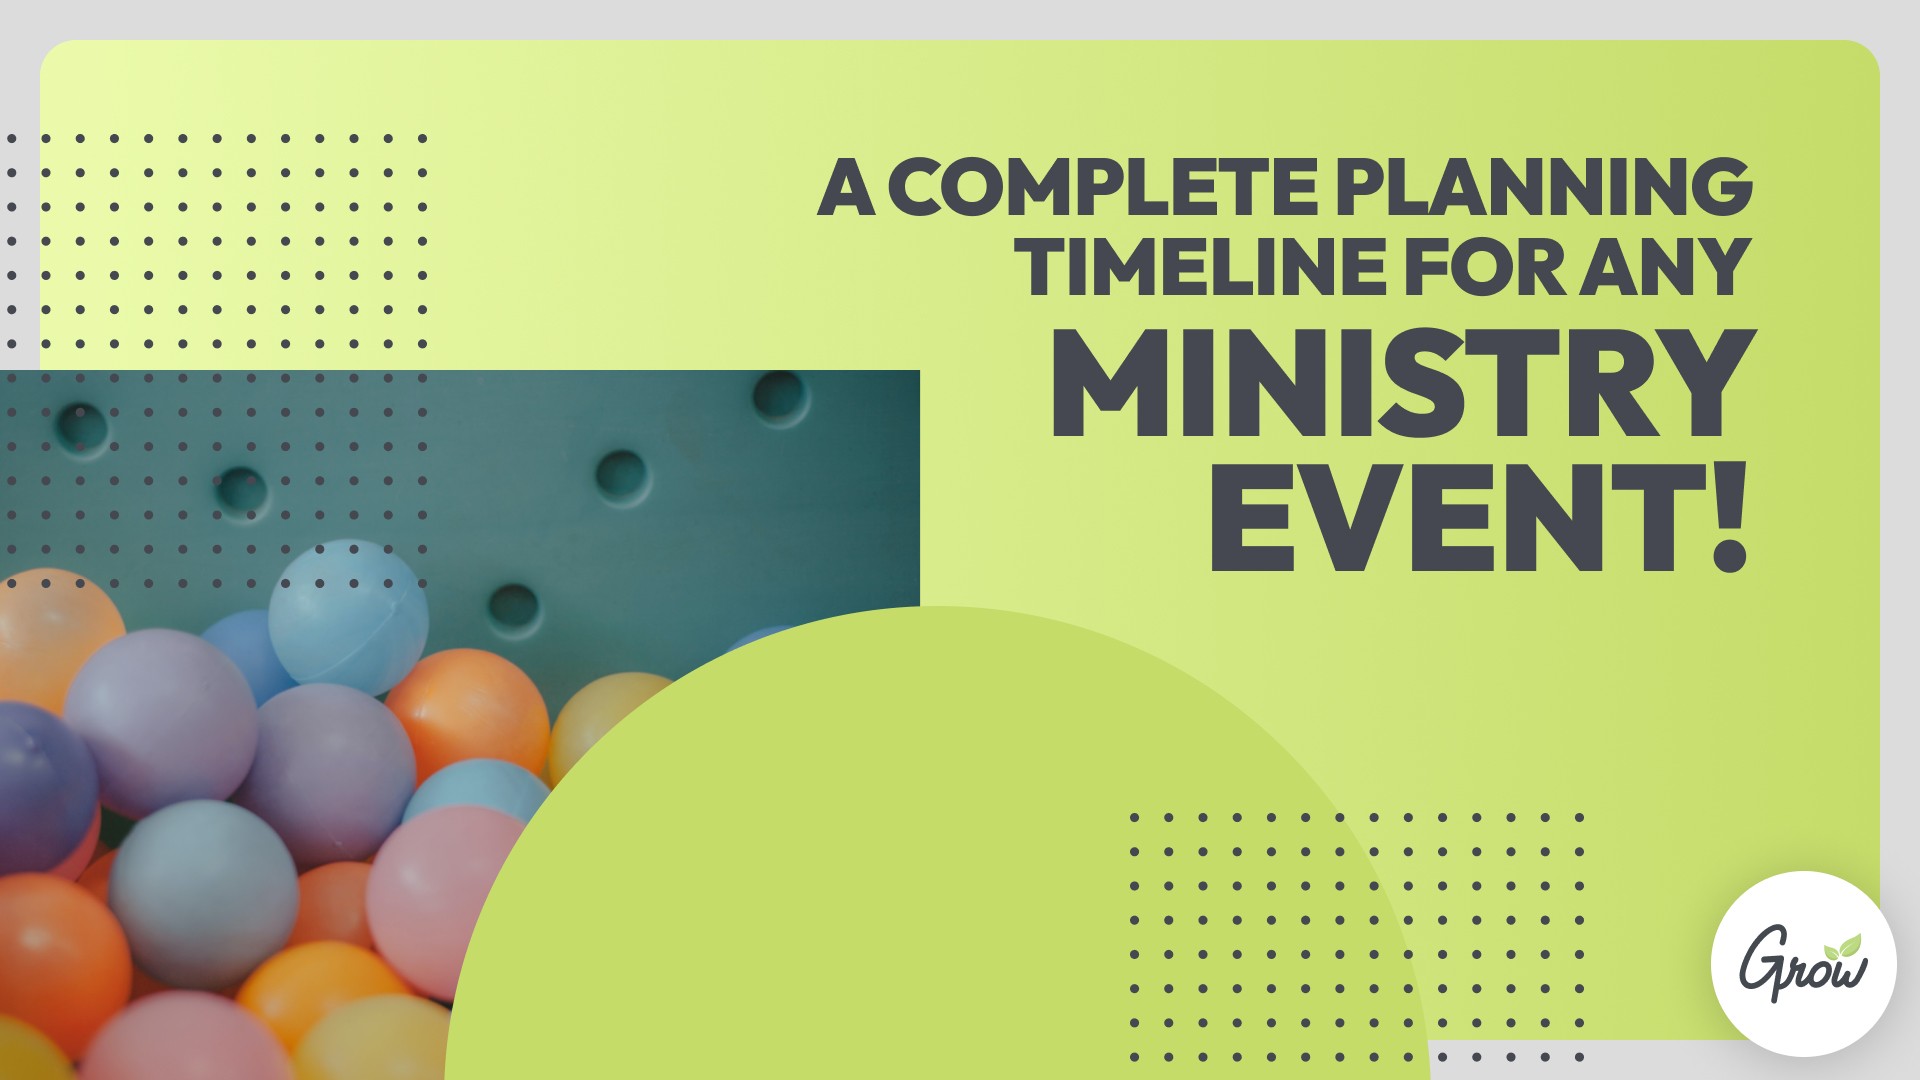 A Complete Planning Timeline for Any Ministry Event!